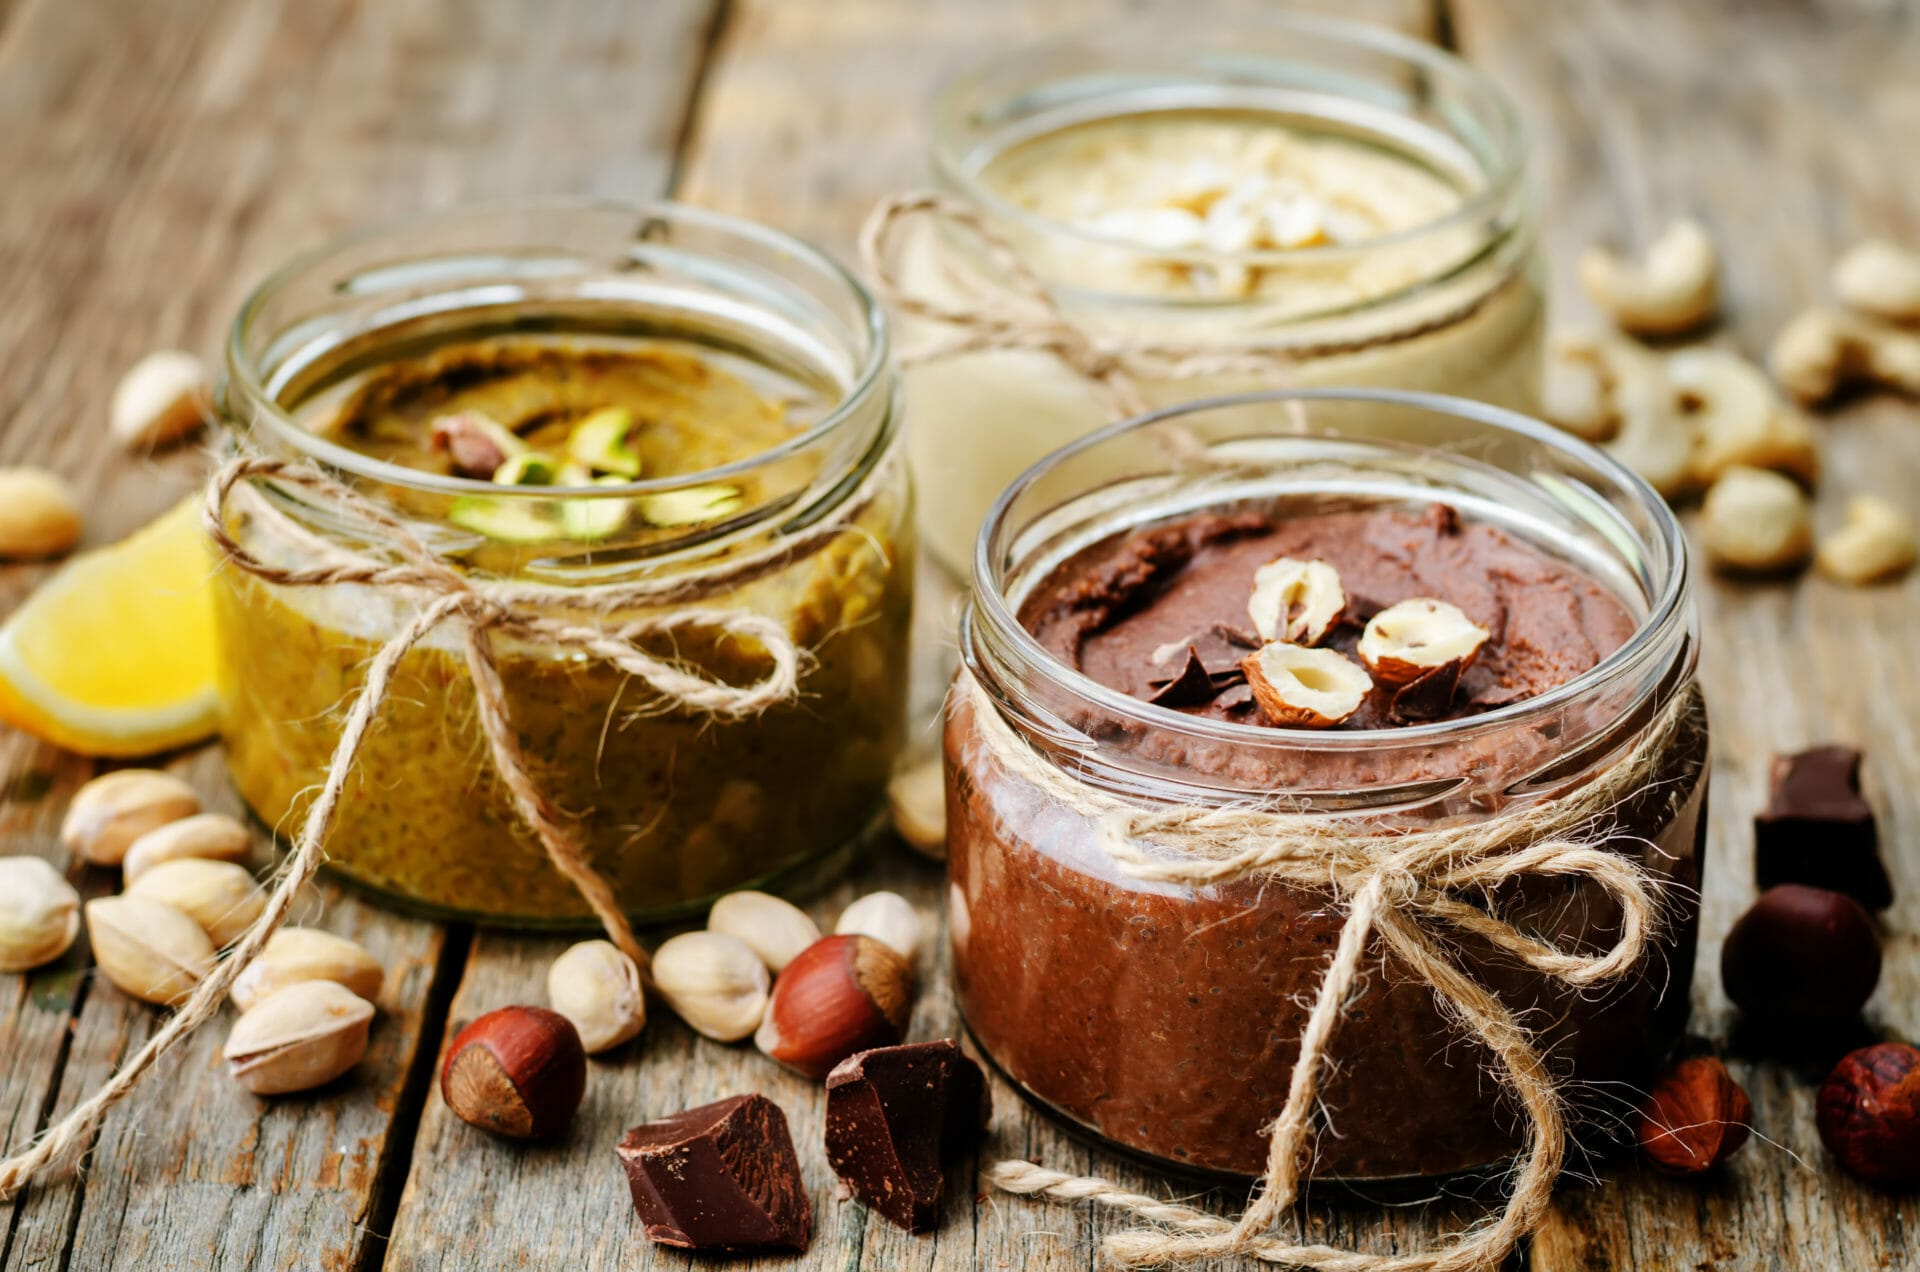 What are the best nut butters for keto?